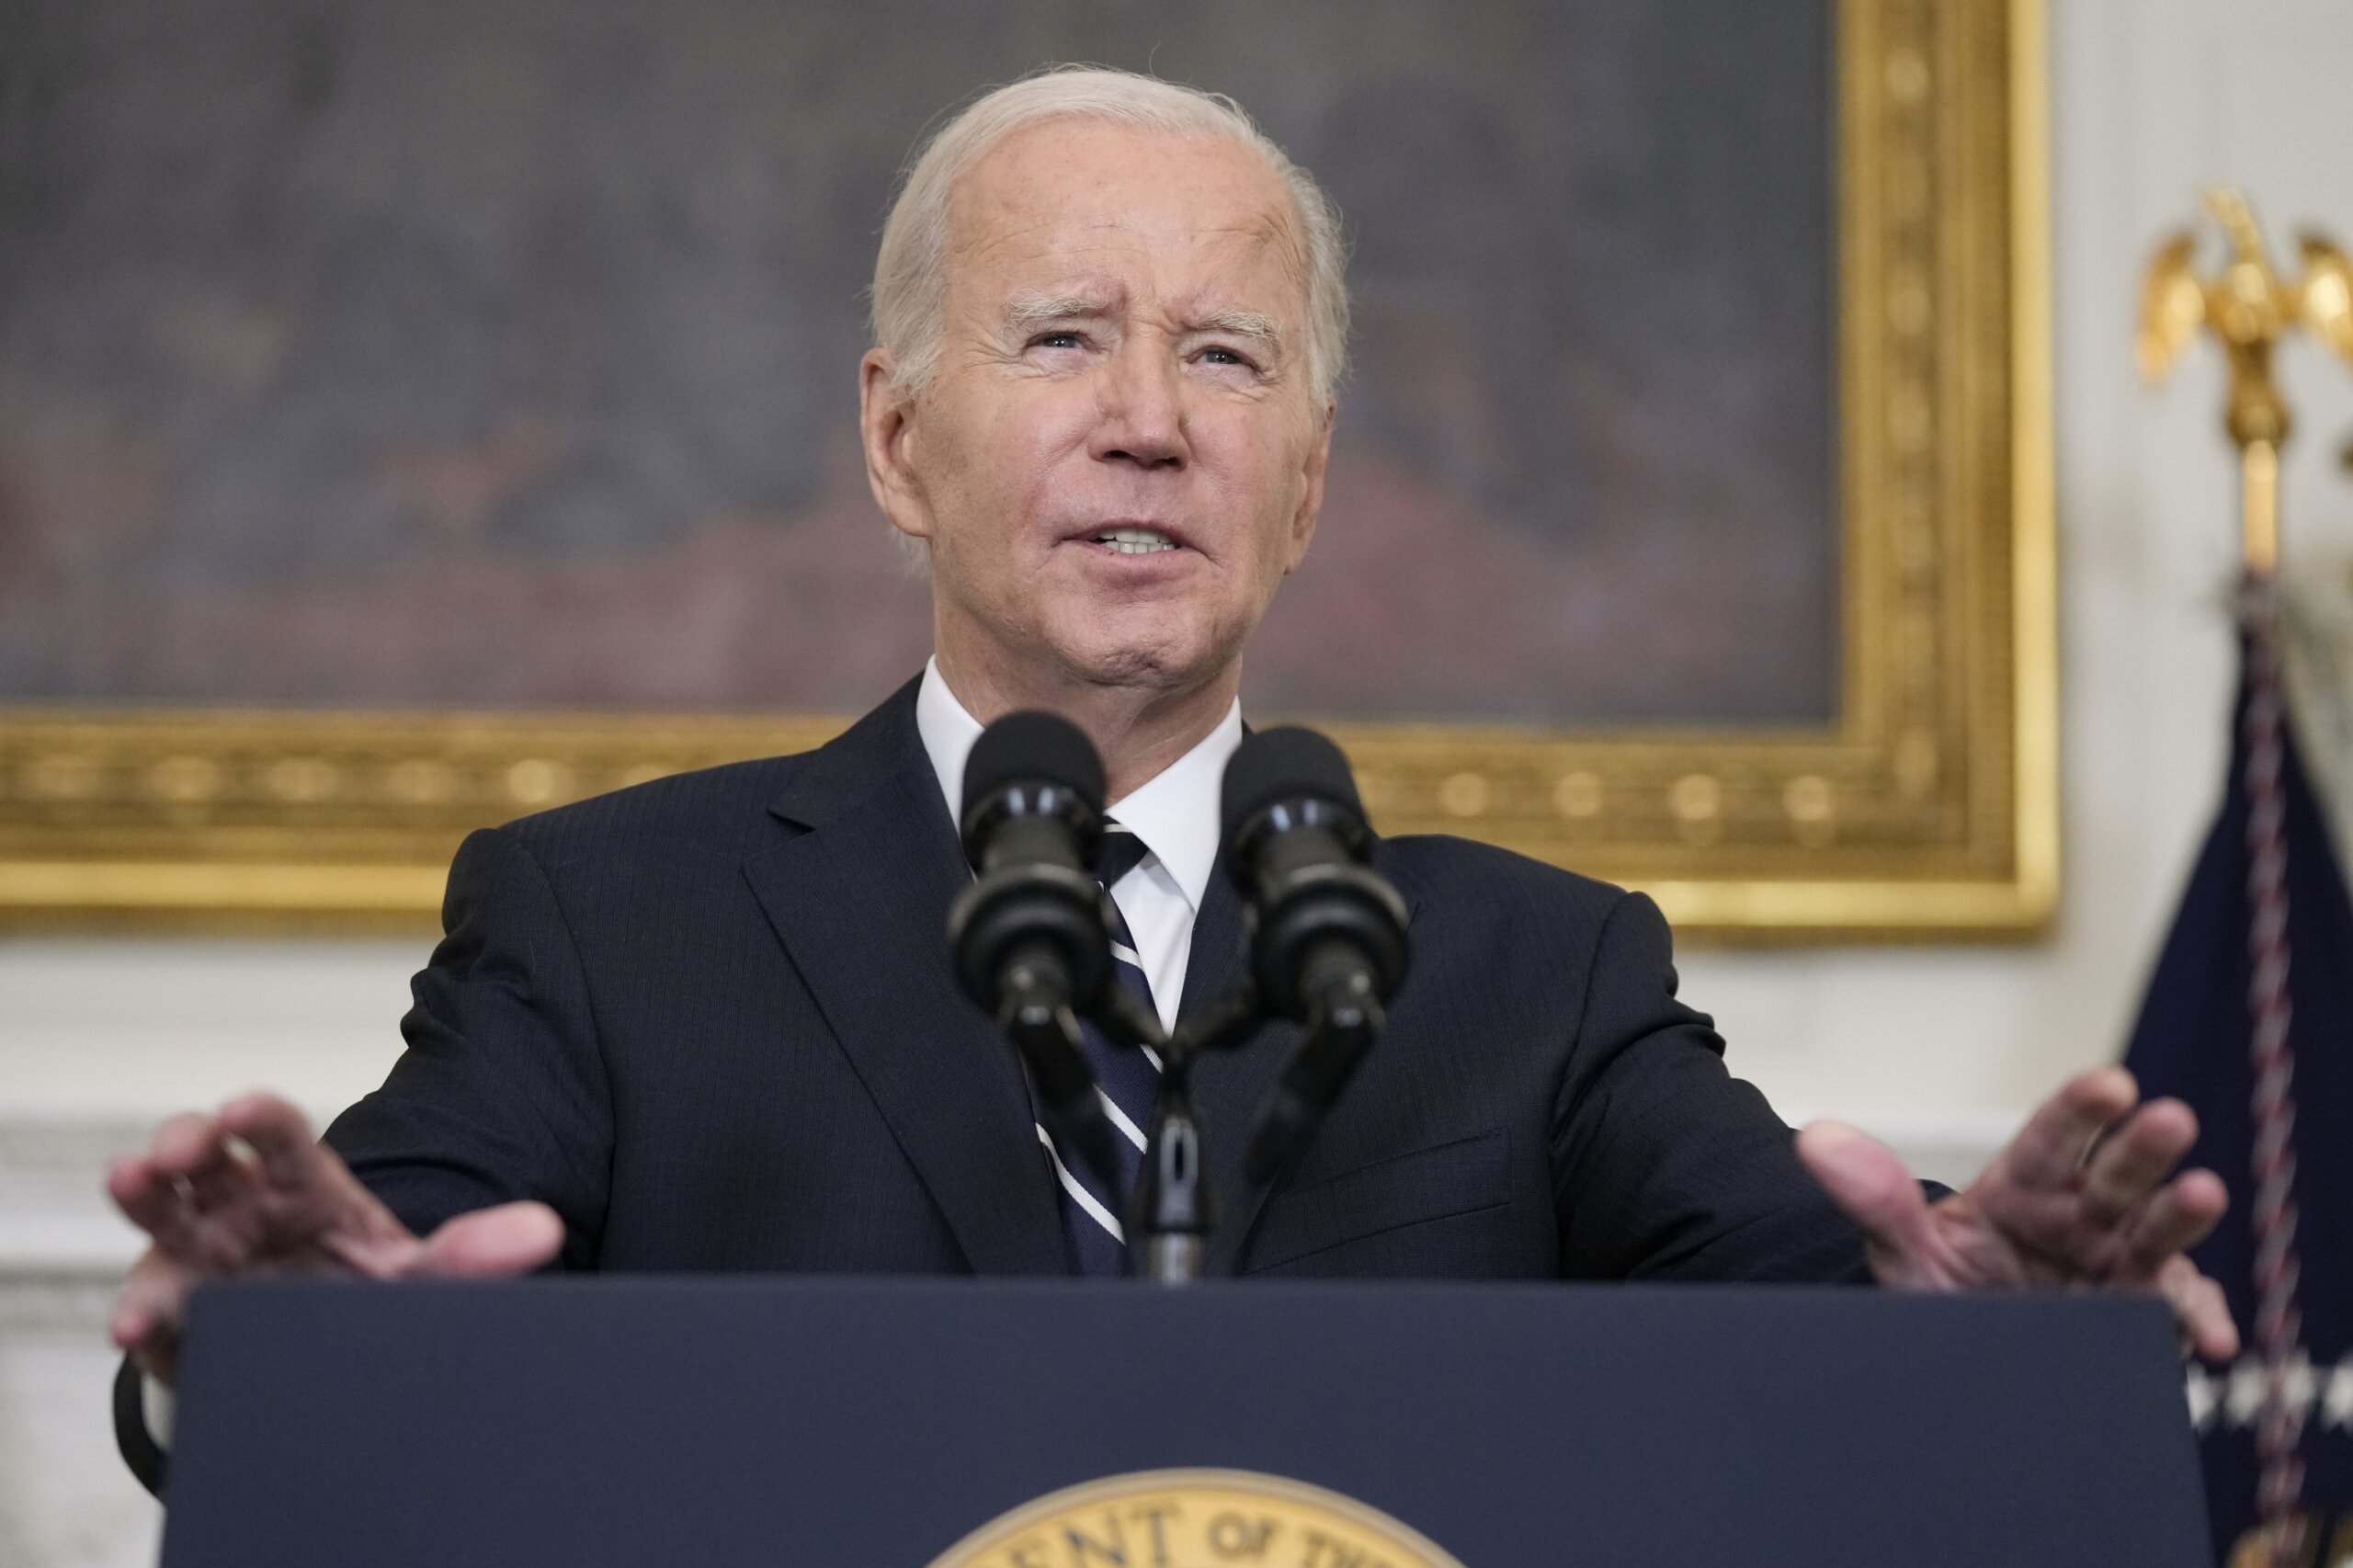 Hunter Biden investigations lead to ethical concerns about President Biden, an AP-NORC poll shows